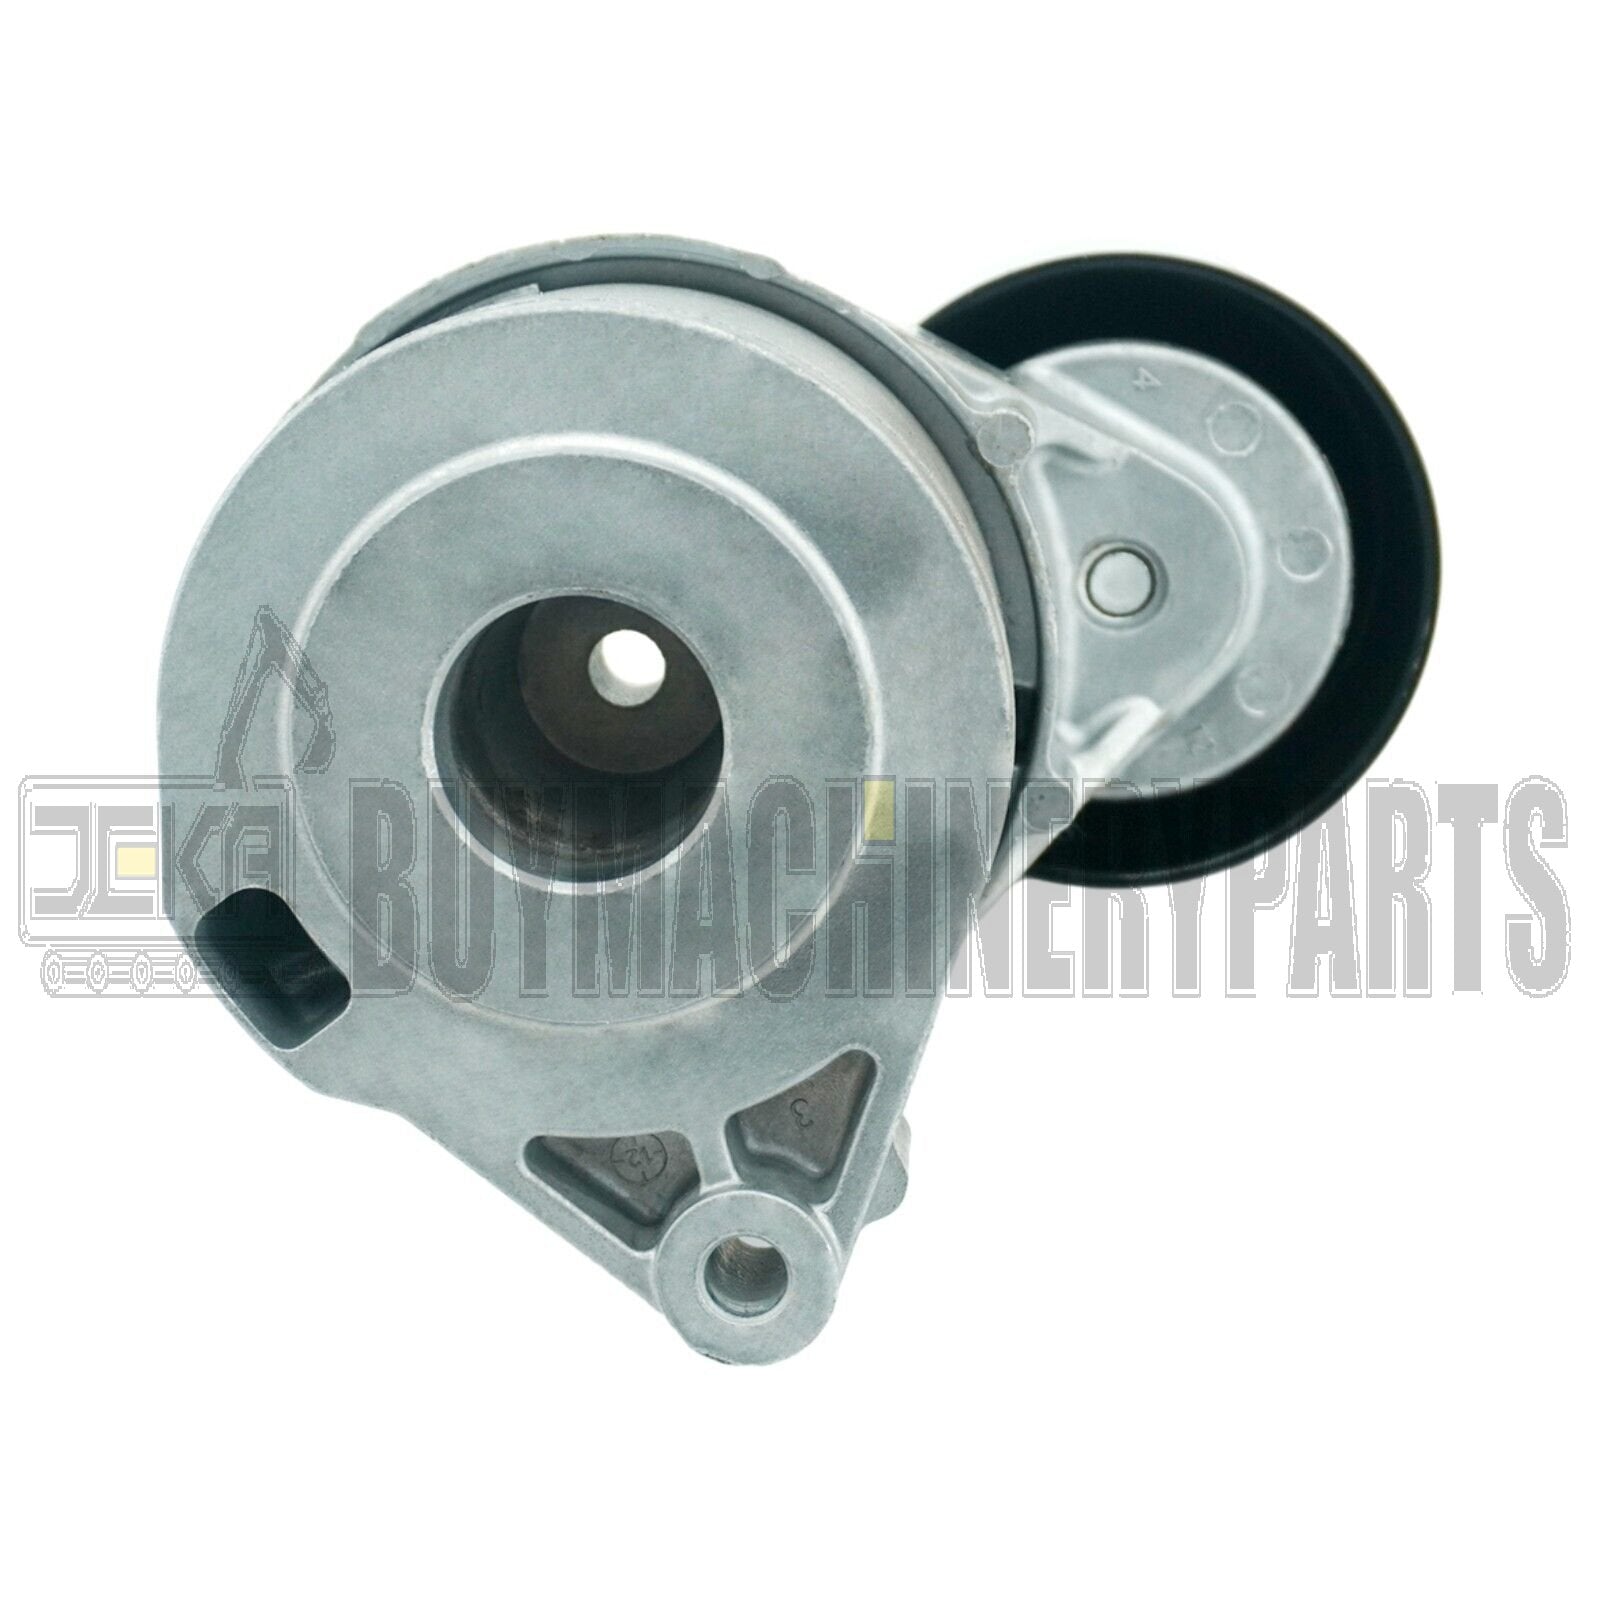 Auto Belt Tensioner Assembly 39073 for Acura TSX Honda Accord Crosstour l4 2.4L